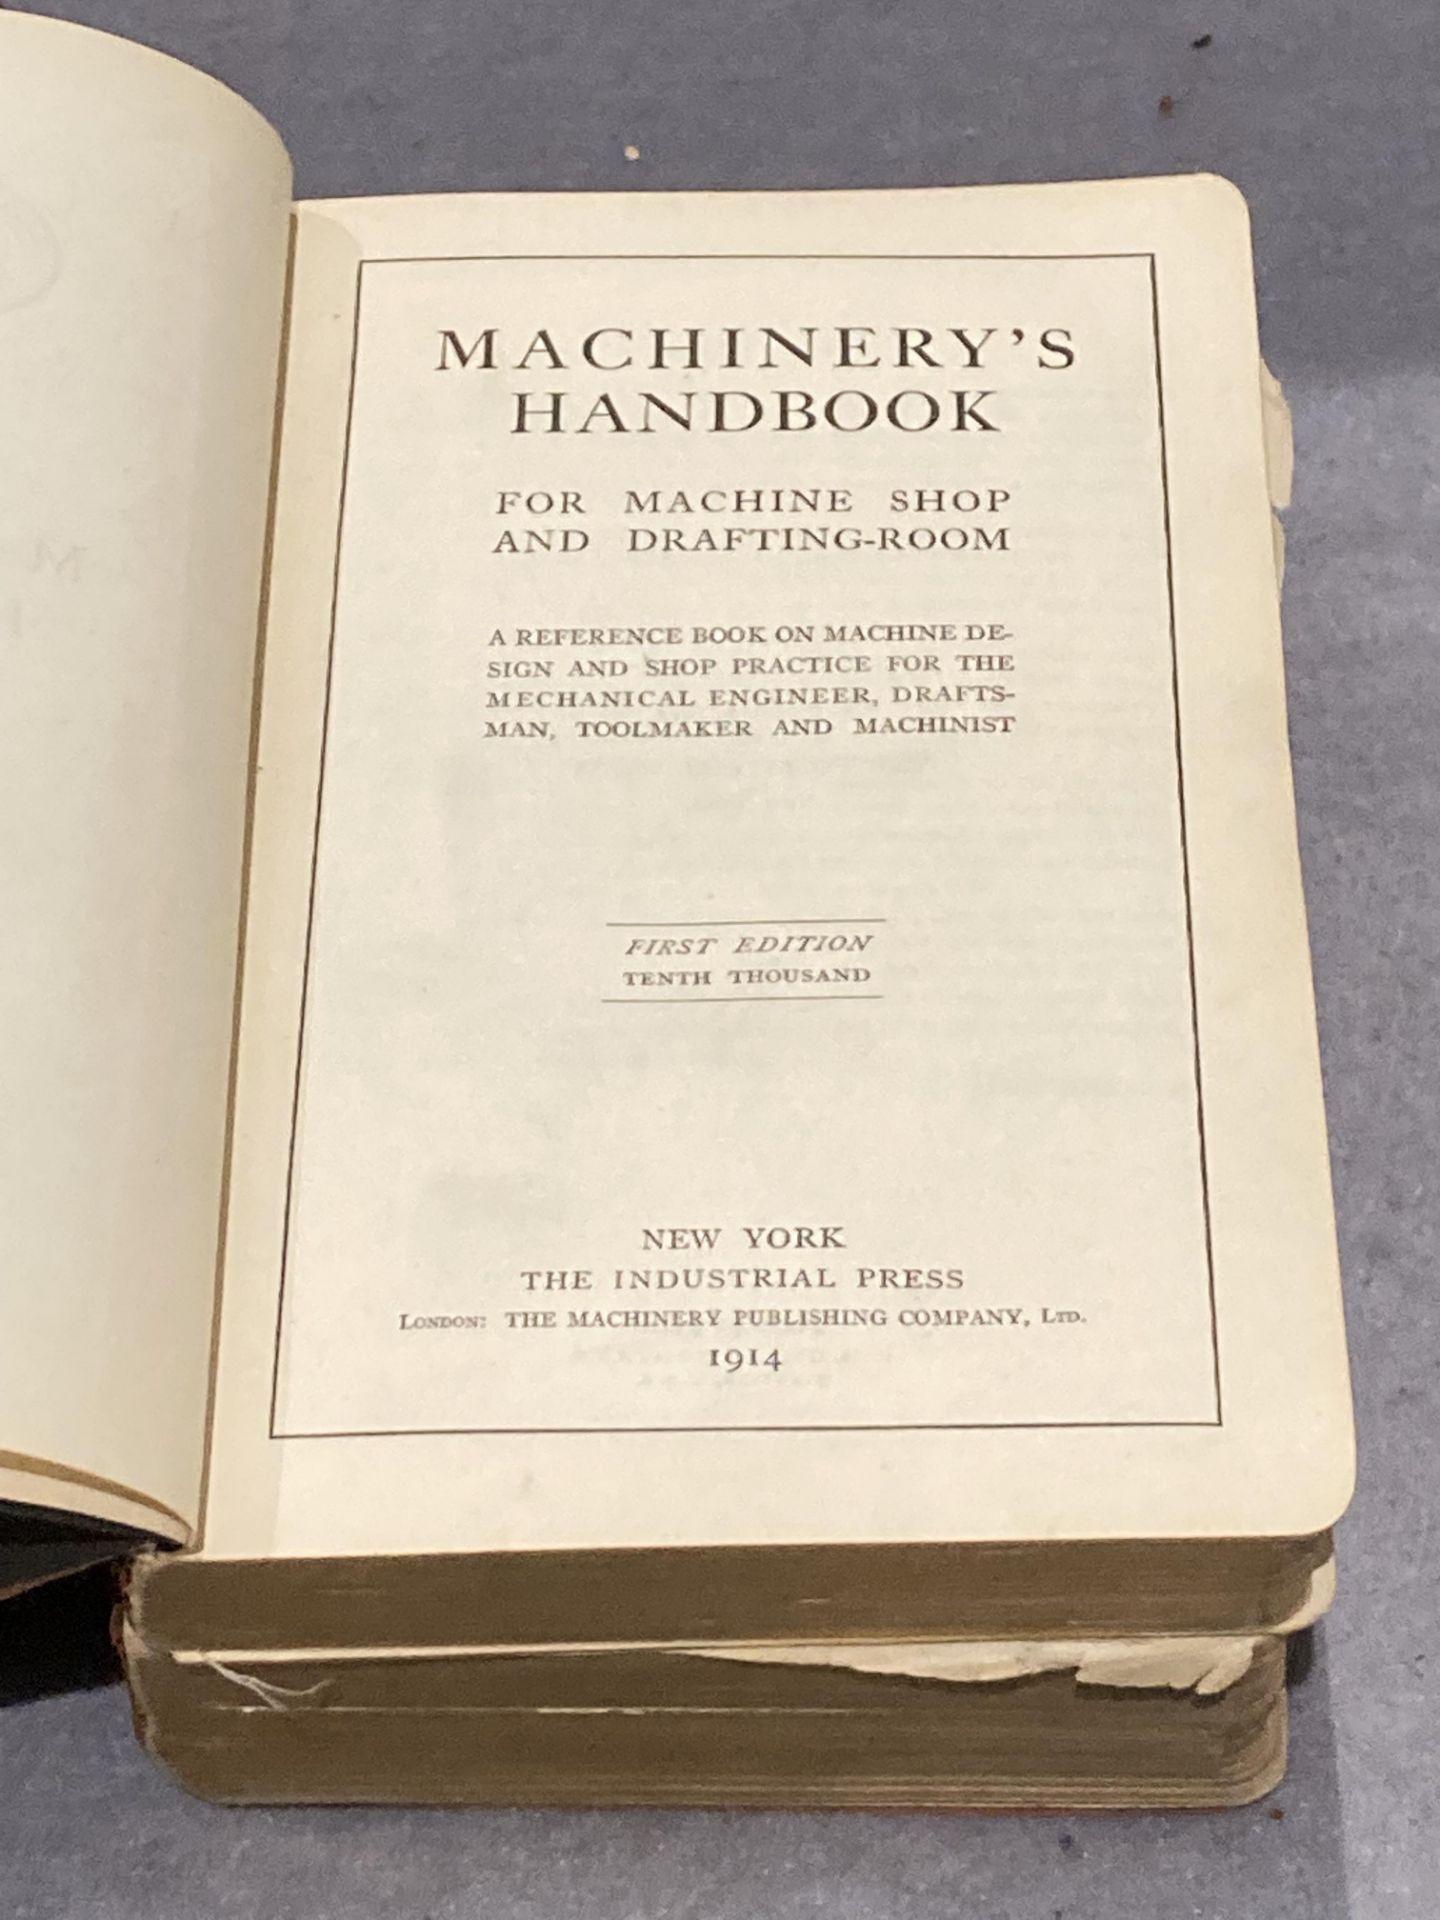 Machinery's Handbook, 1914 first edition, published in New York by the Industrial Press, quite rare, - Image 2 of 6